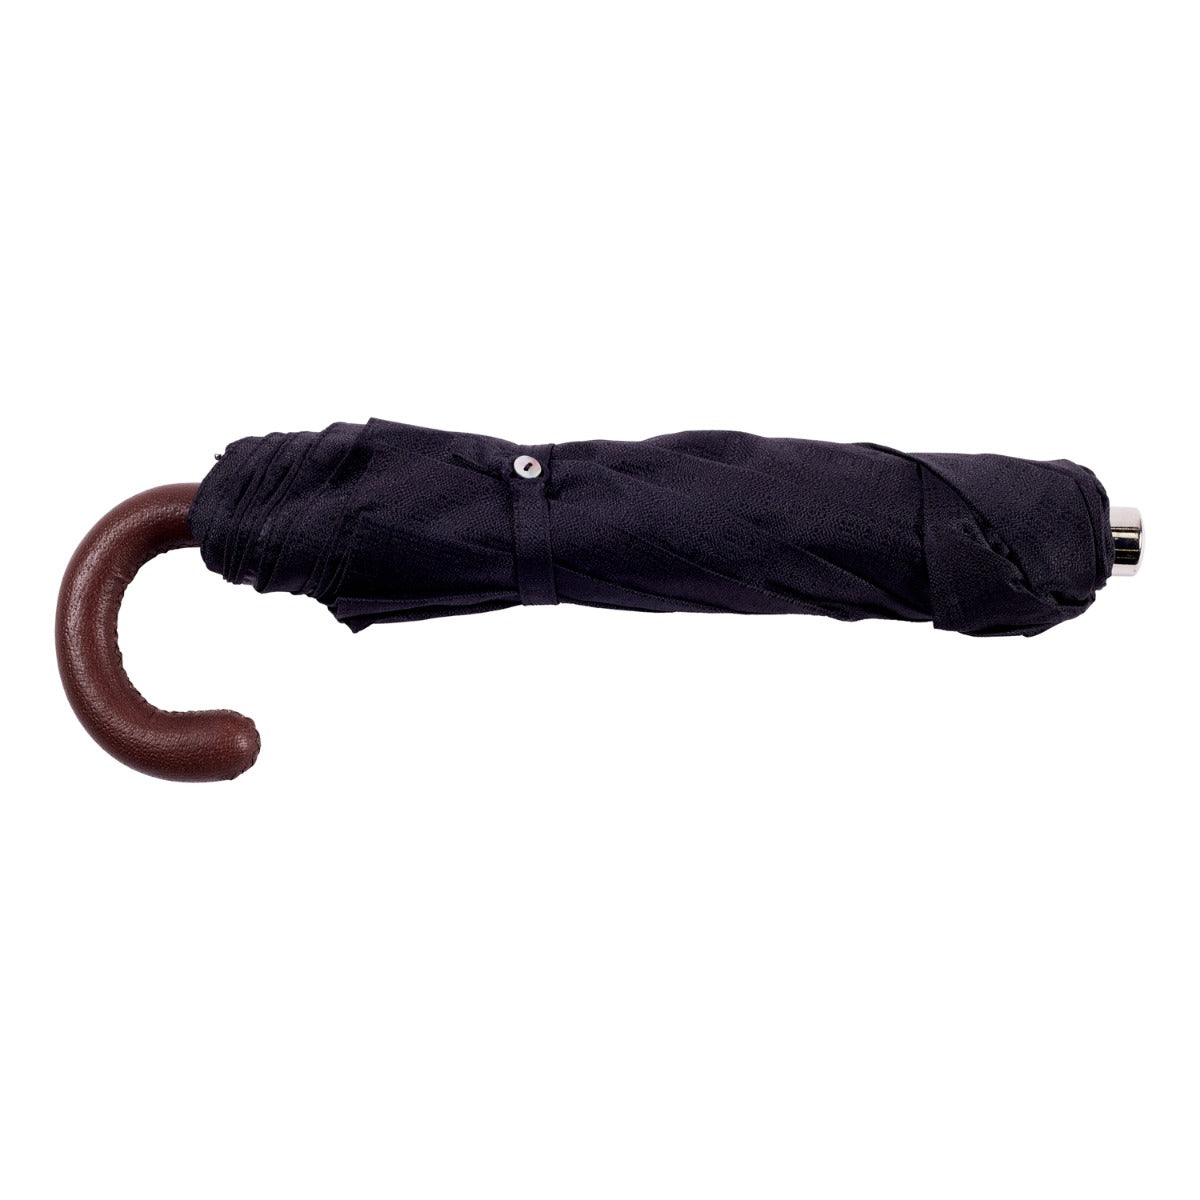 An umbrella with a black canopy and a Brown Pigskin Handled Travel Umbrella by KirbyAllison.com.